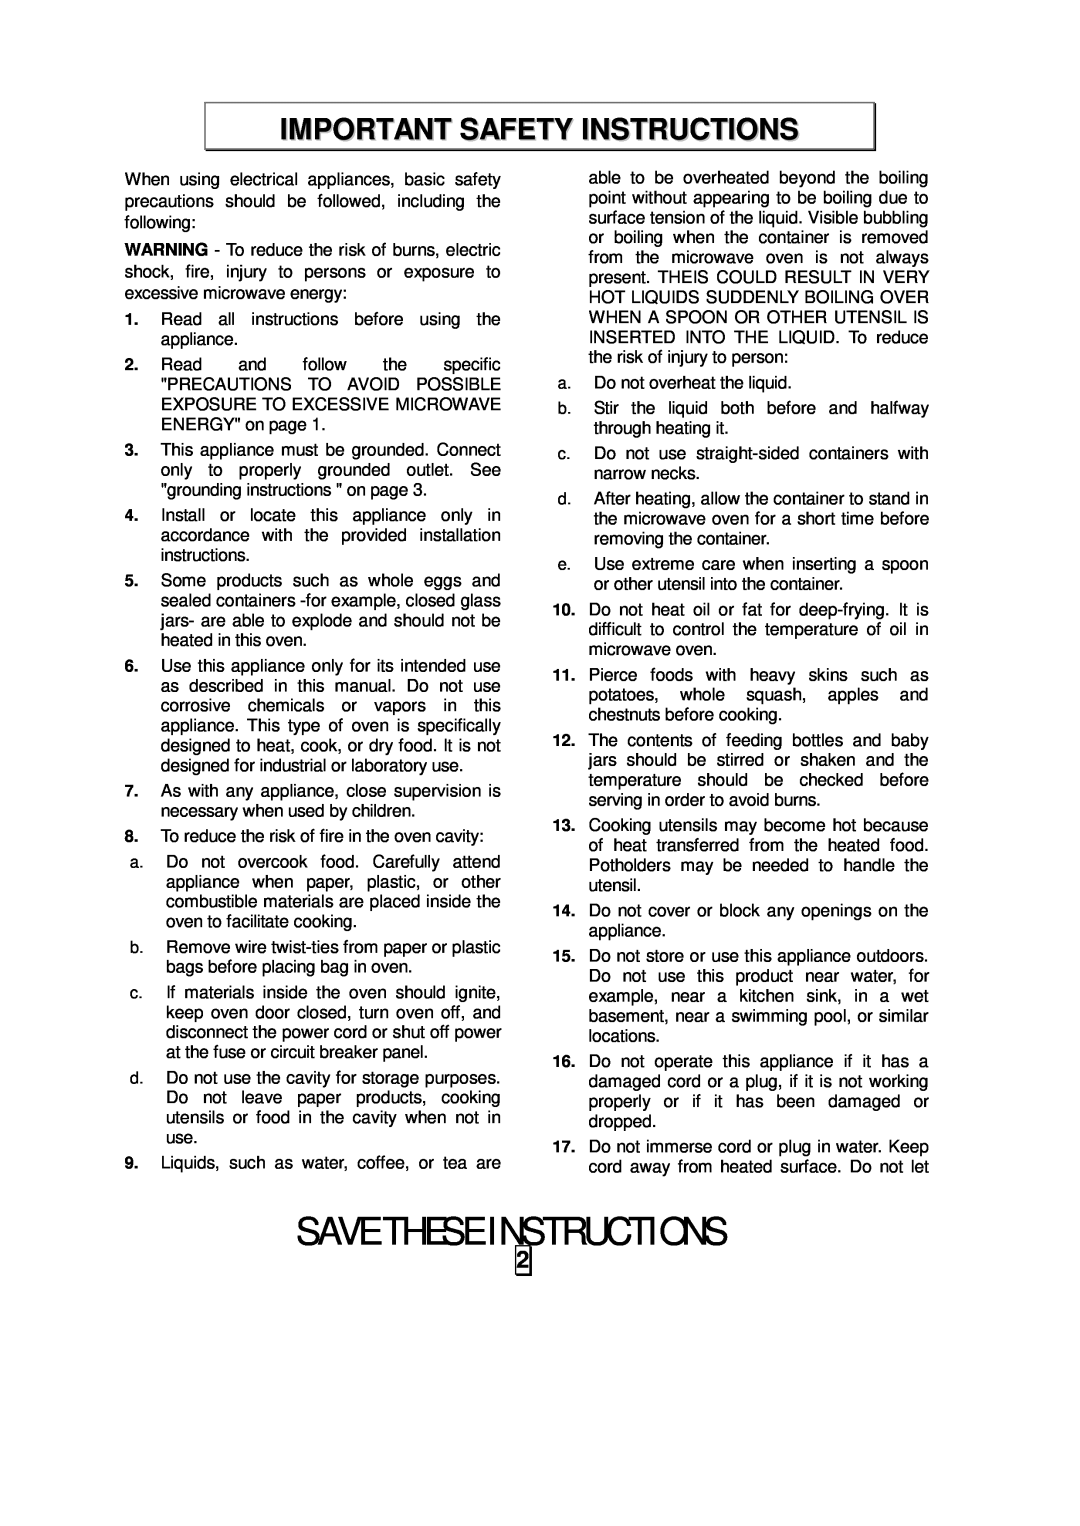 Sunbeam SMW958 owner manual Save These Instructions, Important Safety Instructions 